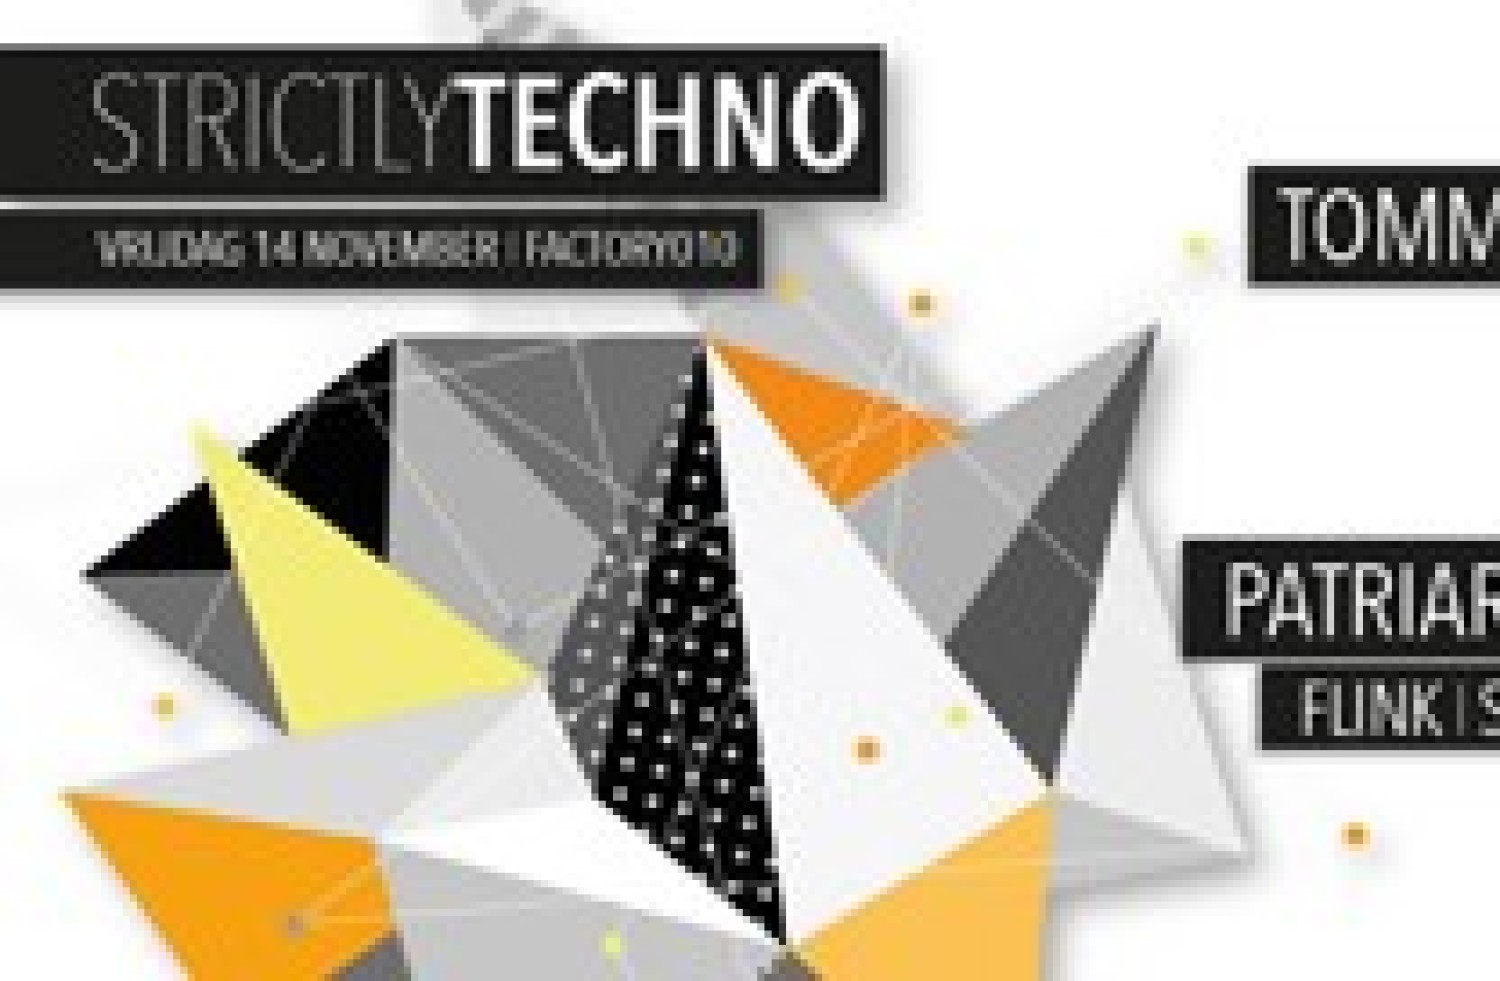 Party report: Strictly Techno, Rotterdam (14-11-2014)